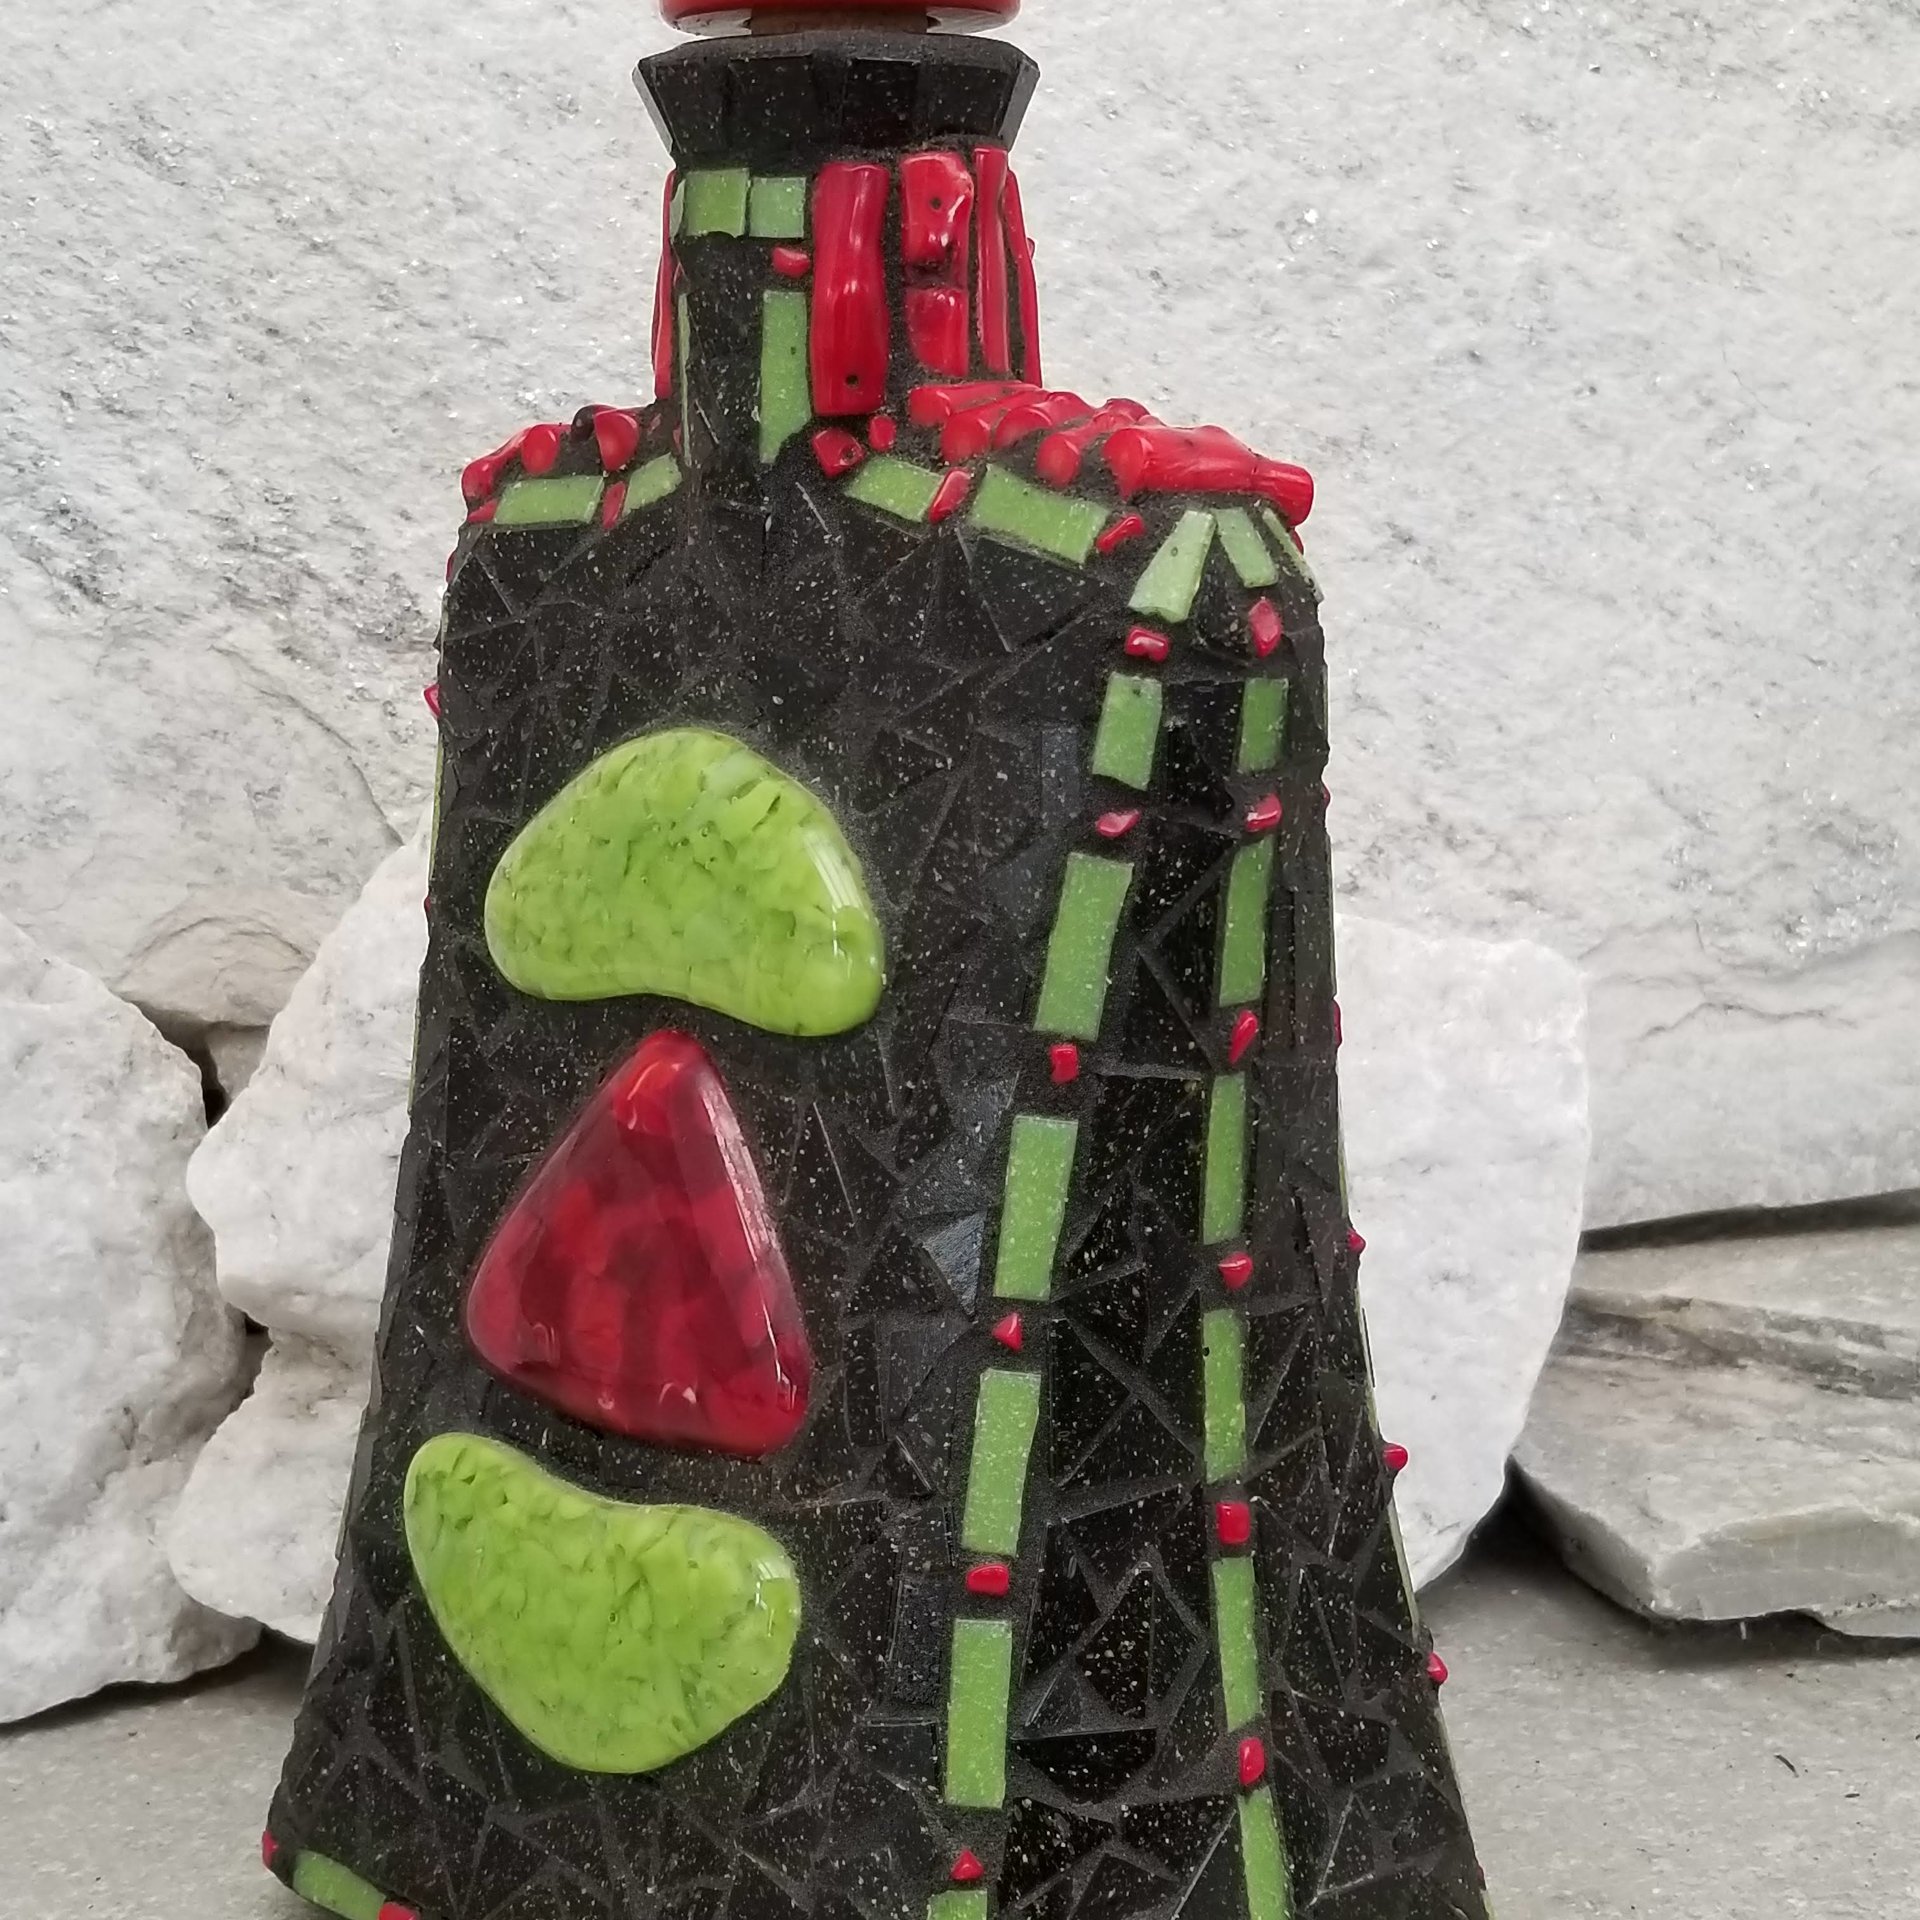 Mosaic Liquor Bottle "In Balance” Up-cycled Decanter